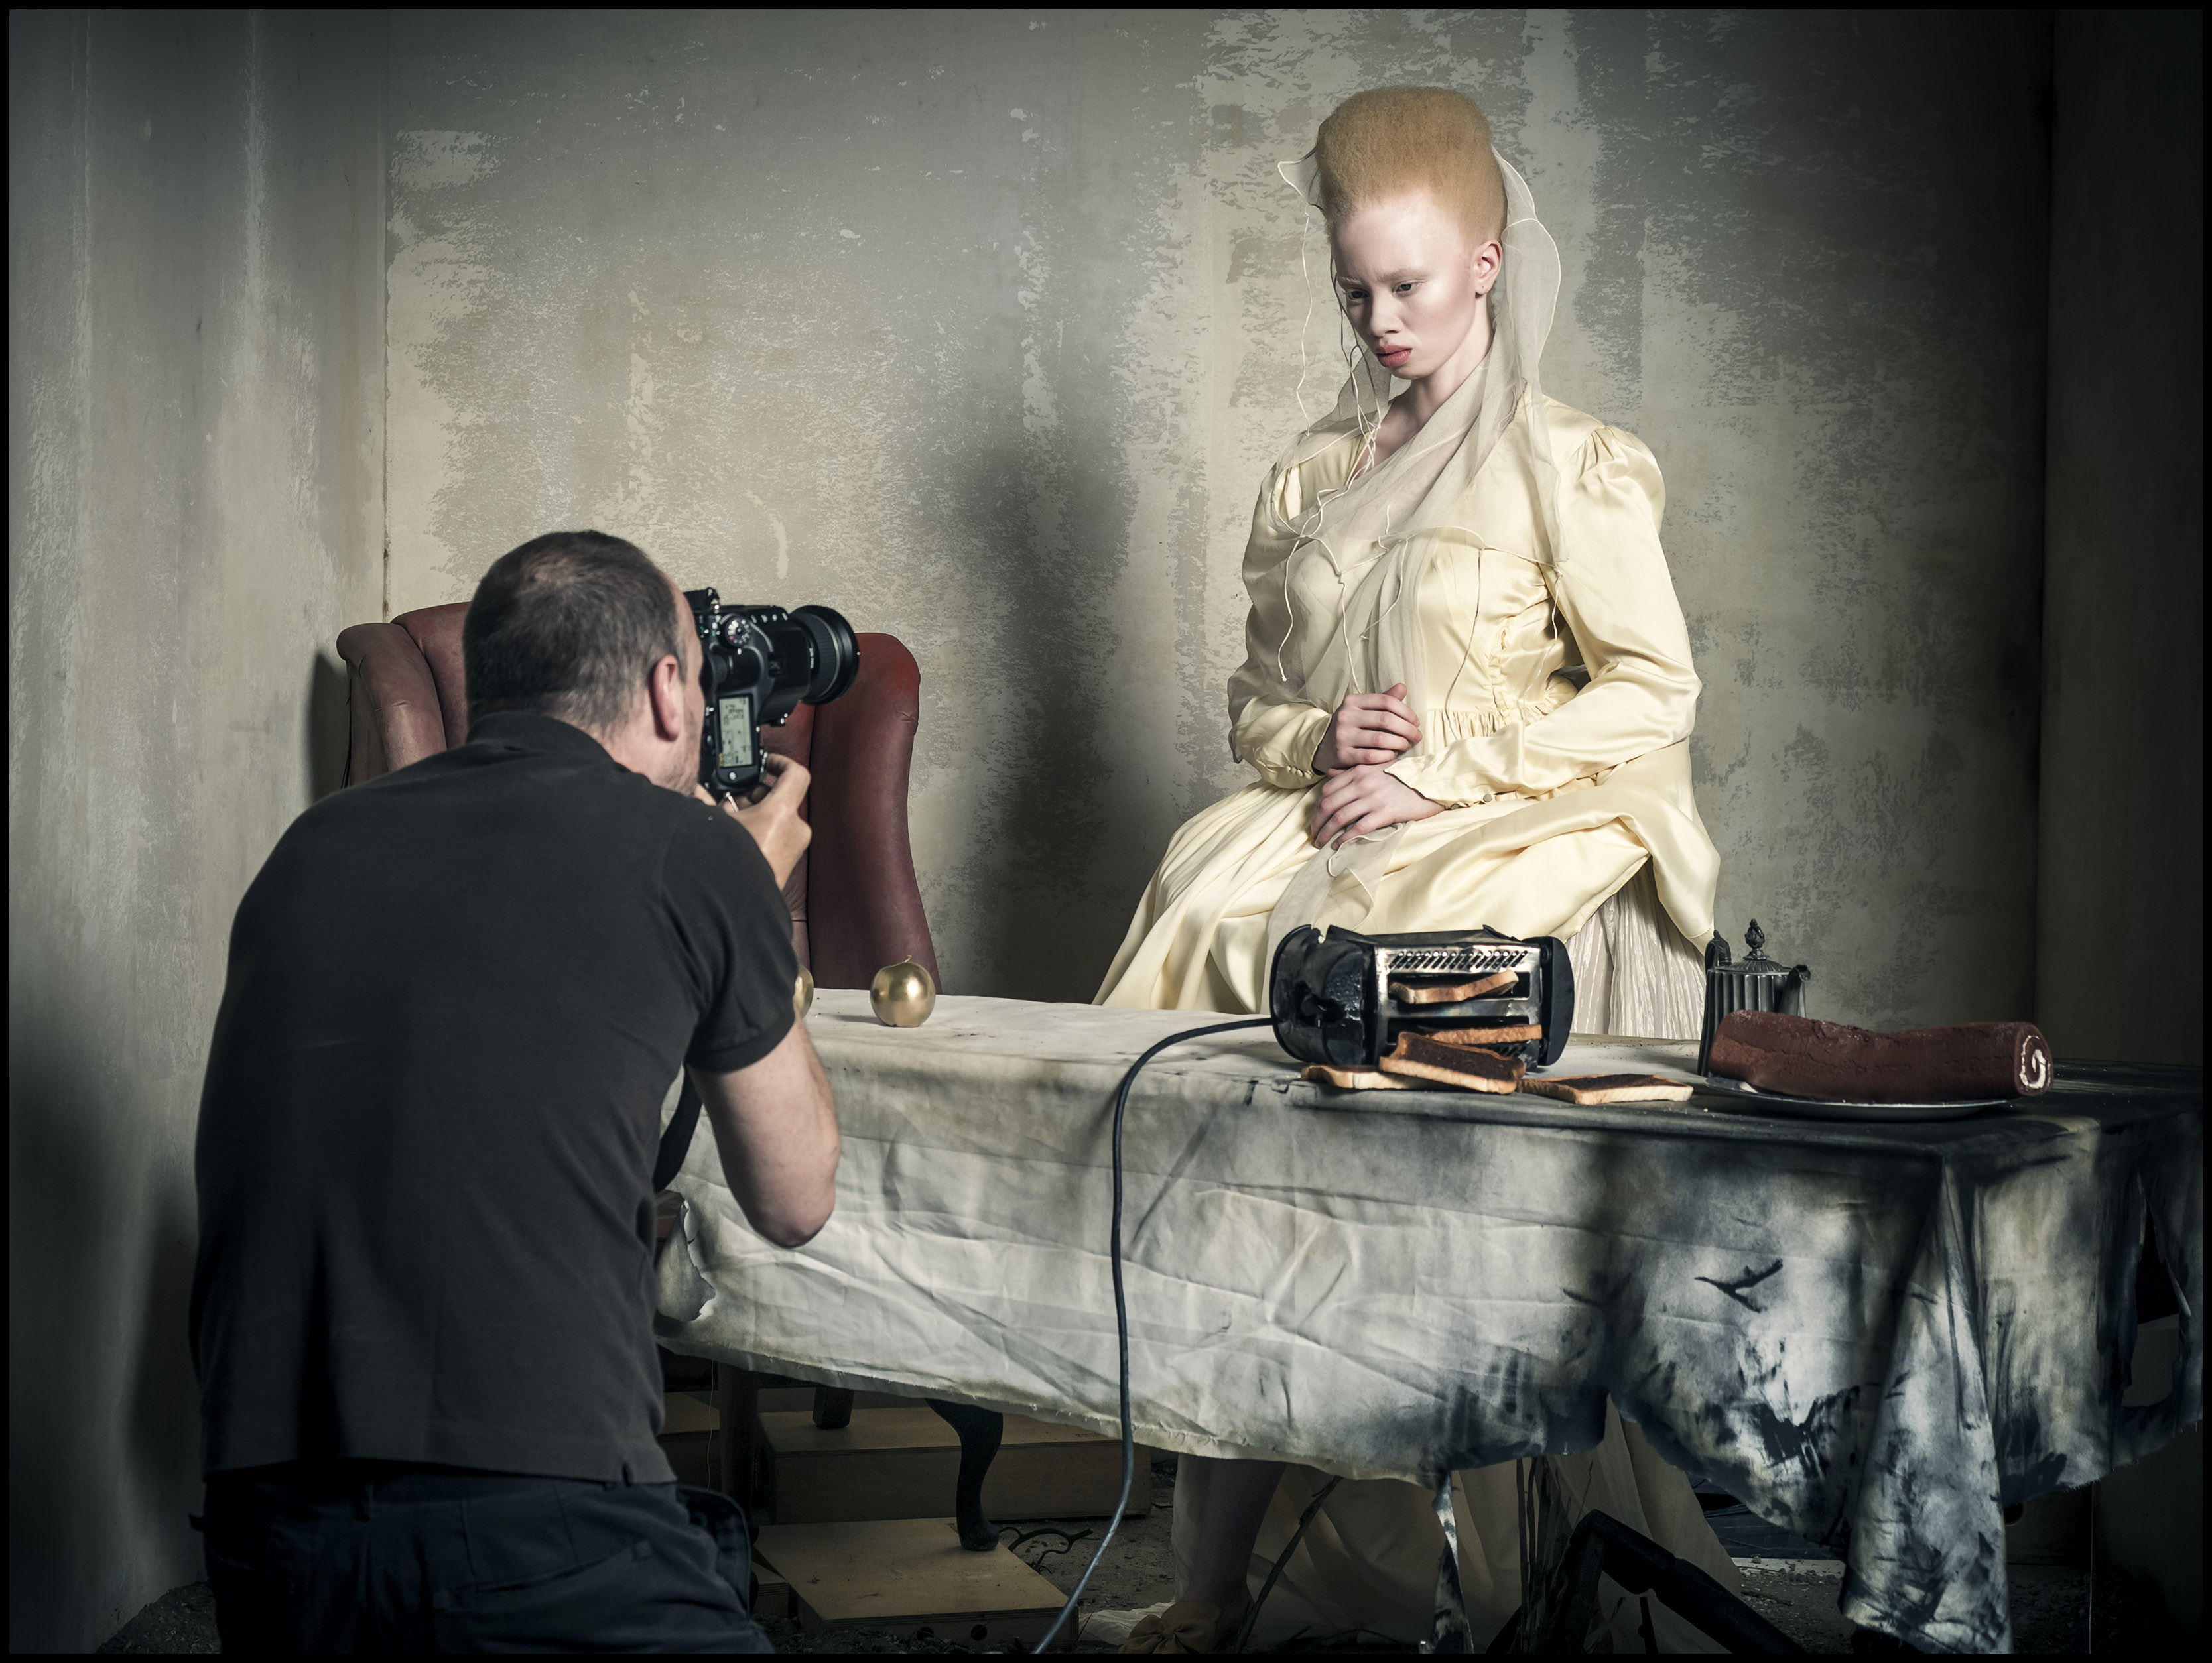 The behind the scenes imagery from the 2018 Pirelli Calendar by Tim Walker  by Alessandro Scotti